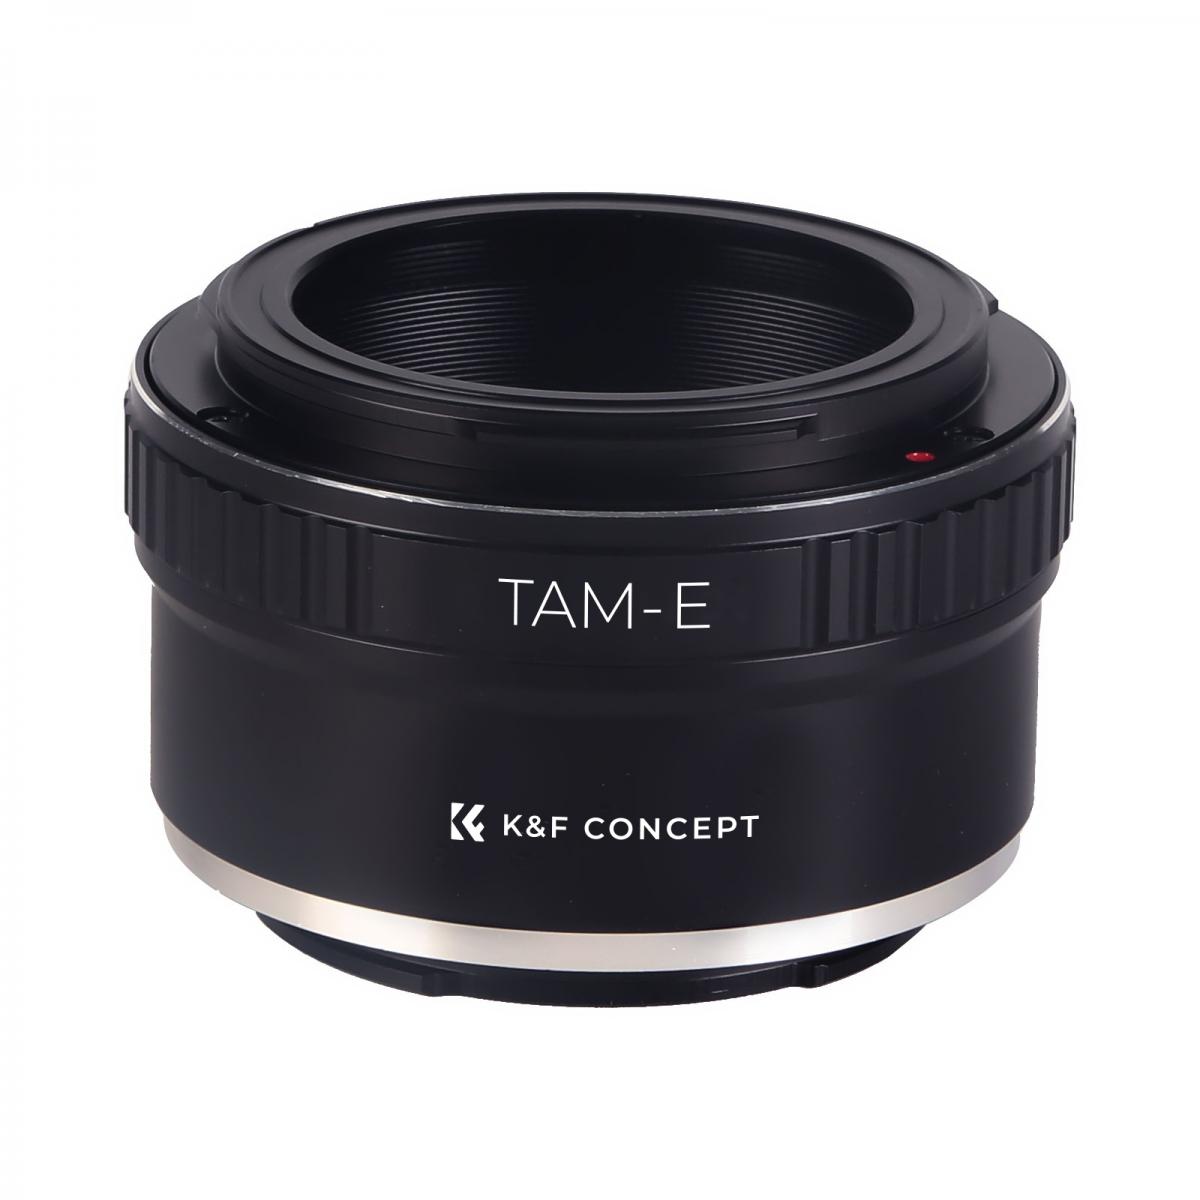 K&F Concept M23101 Tamron Adaptall ii Lenses to Sony E Lens Mount Adapter